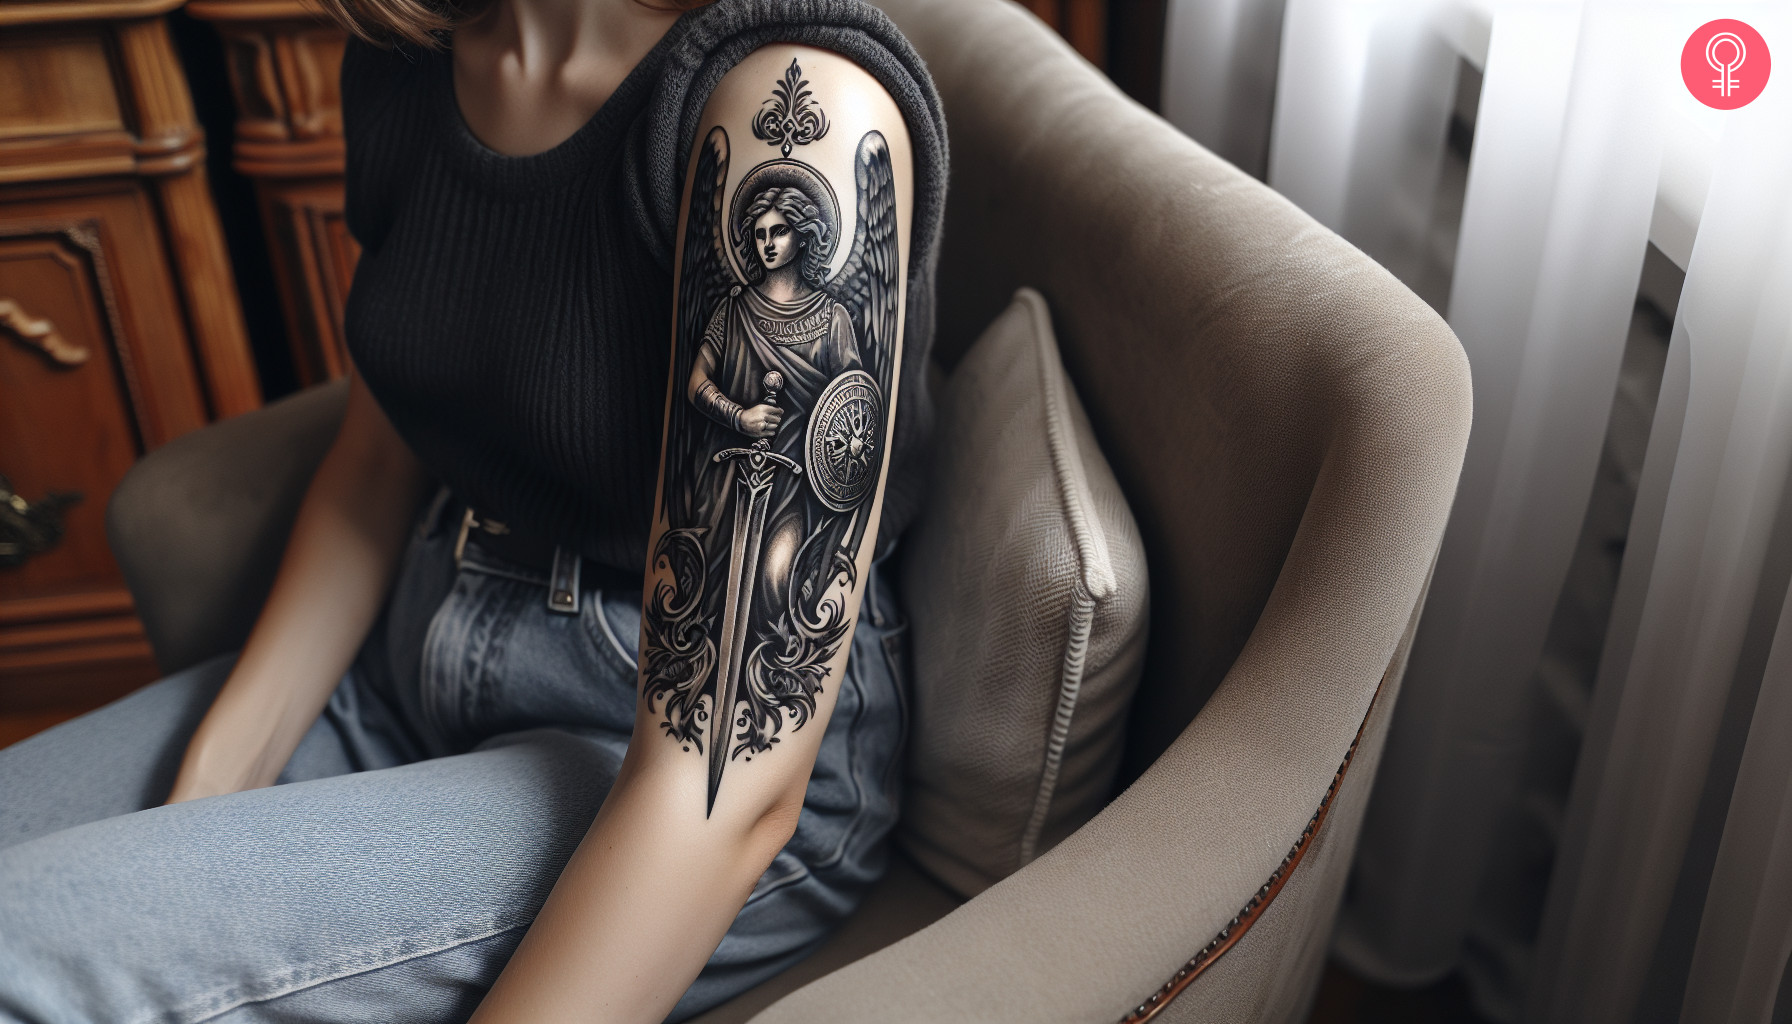 A woman with a tattoo of St. Michael holding a sword and shield